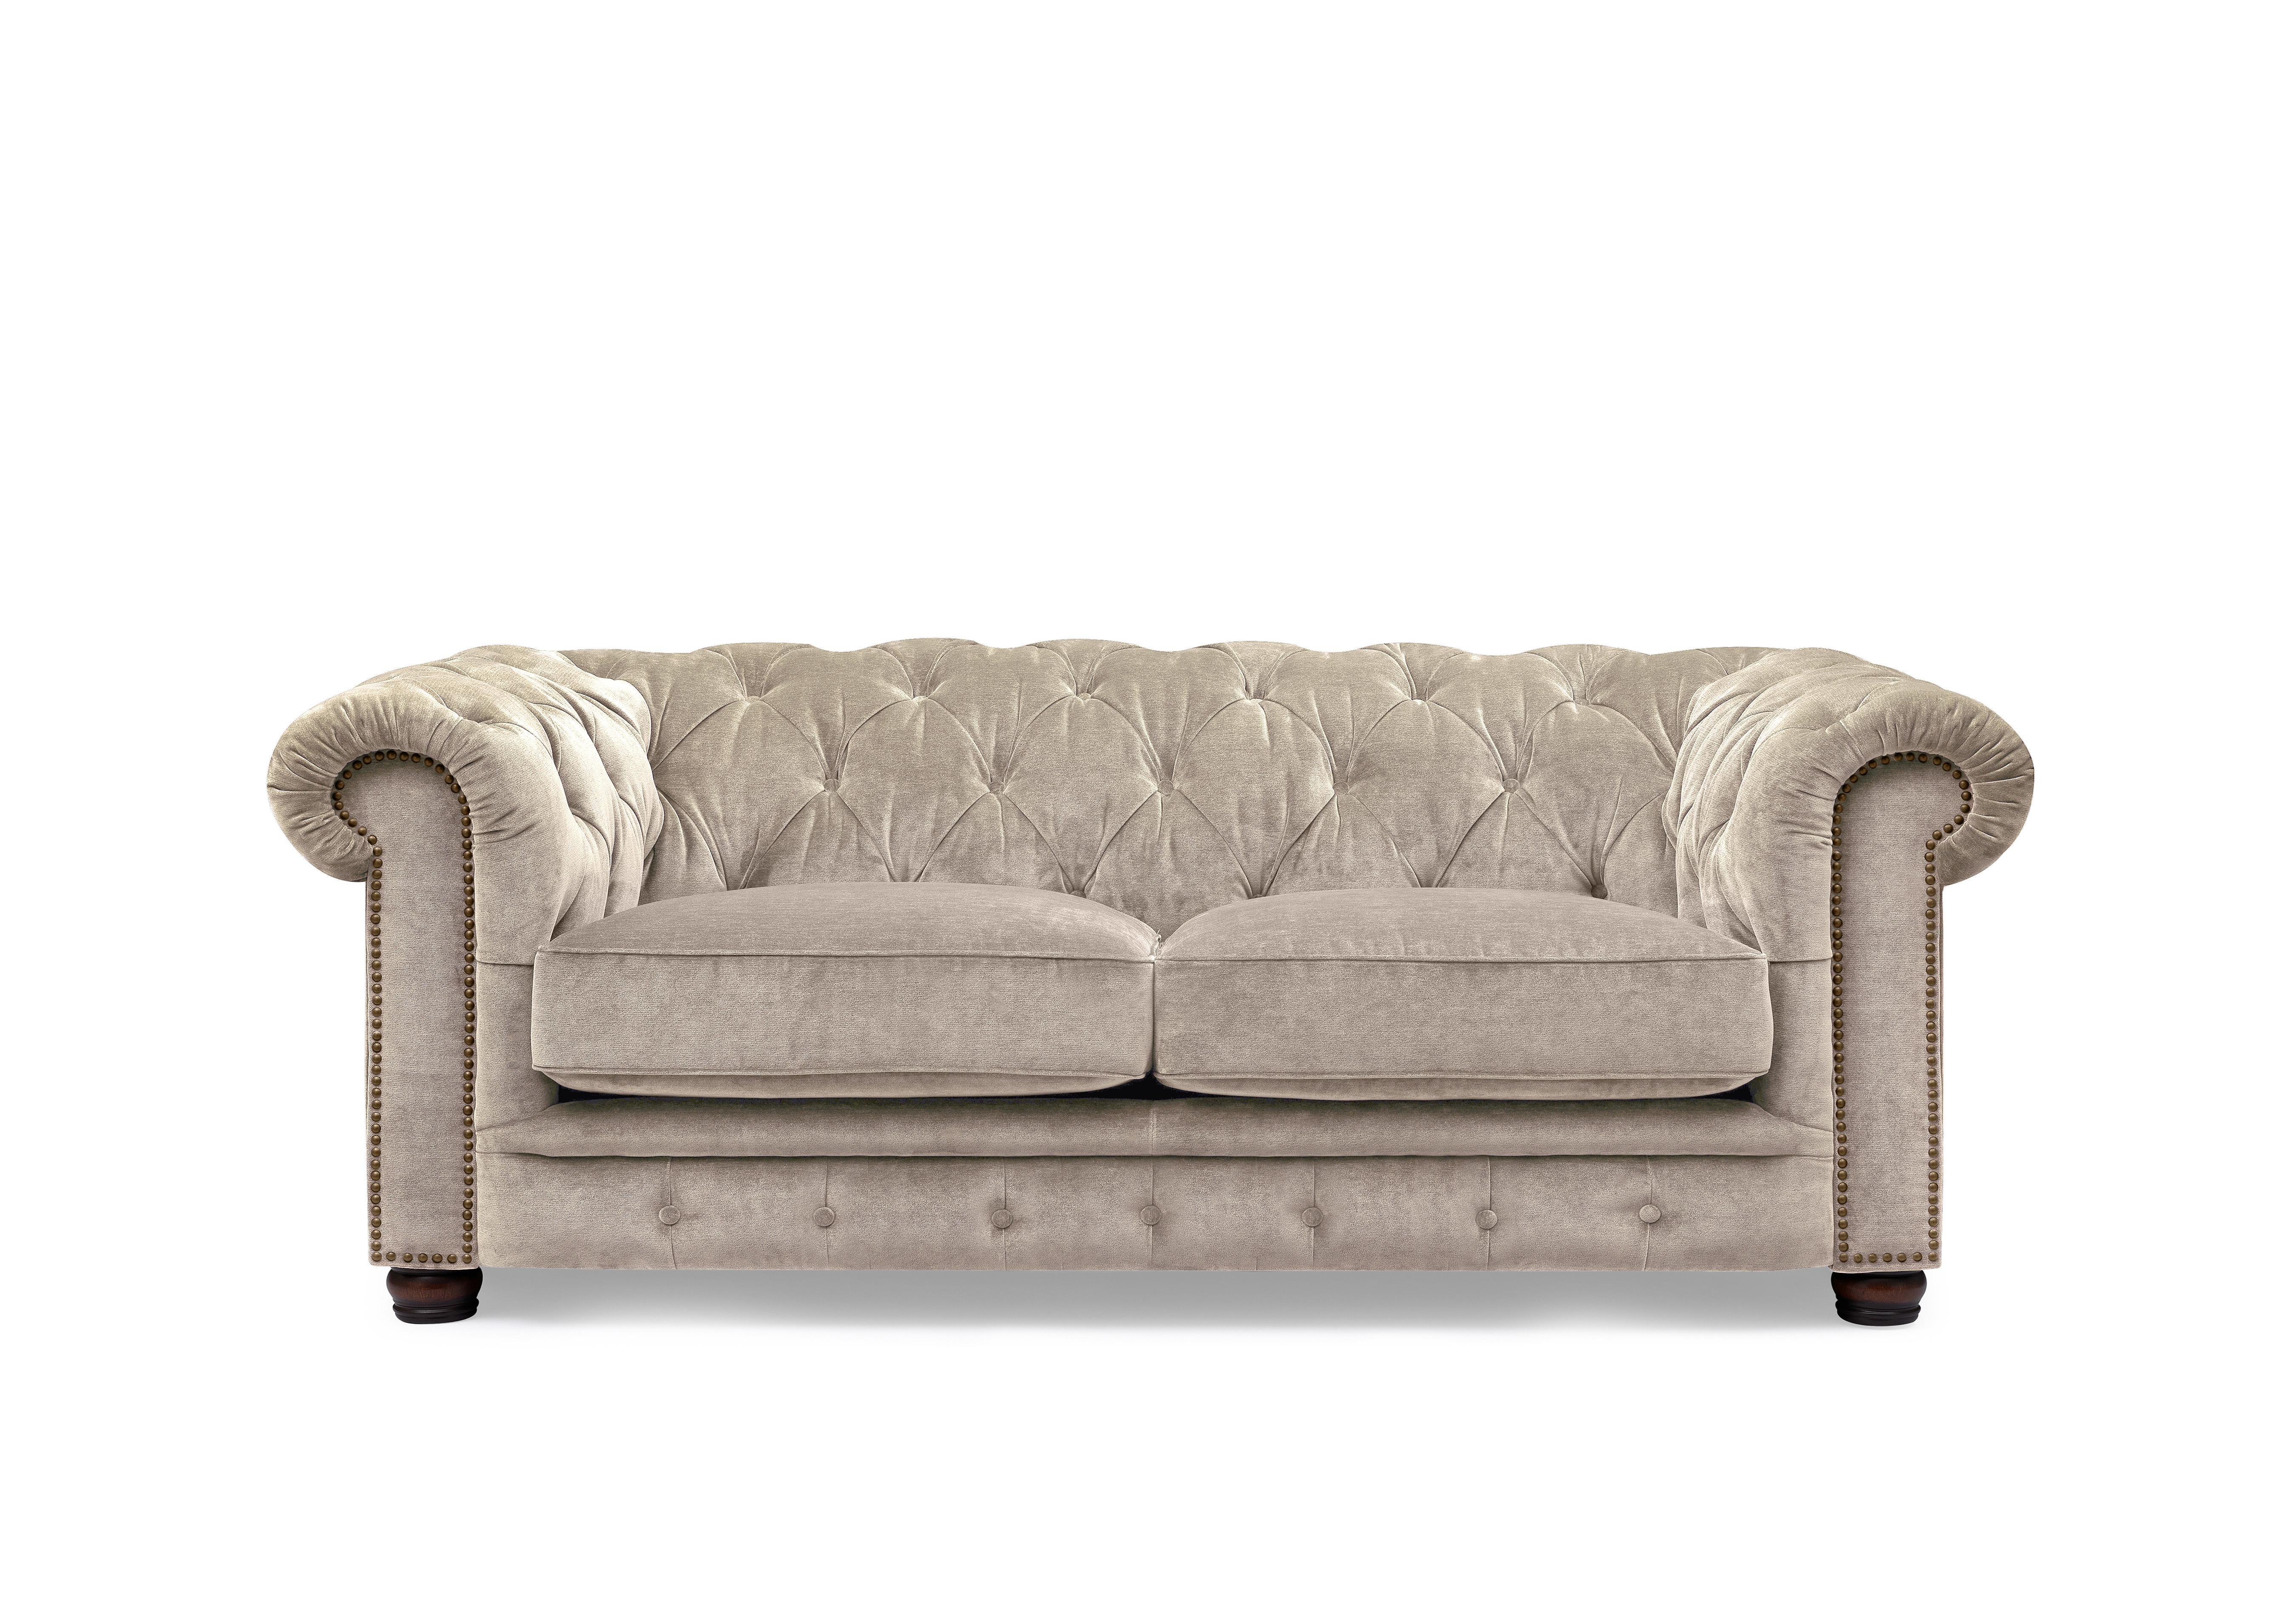 Shackleton 3 Seater Fabric Chesterfield Sofa with USB-C in X3y1-W022 Barley on Furniture Village